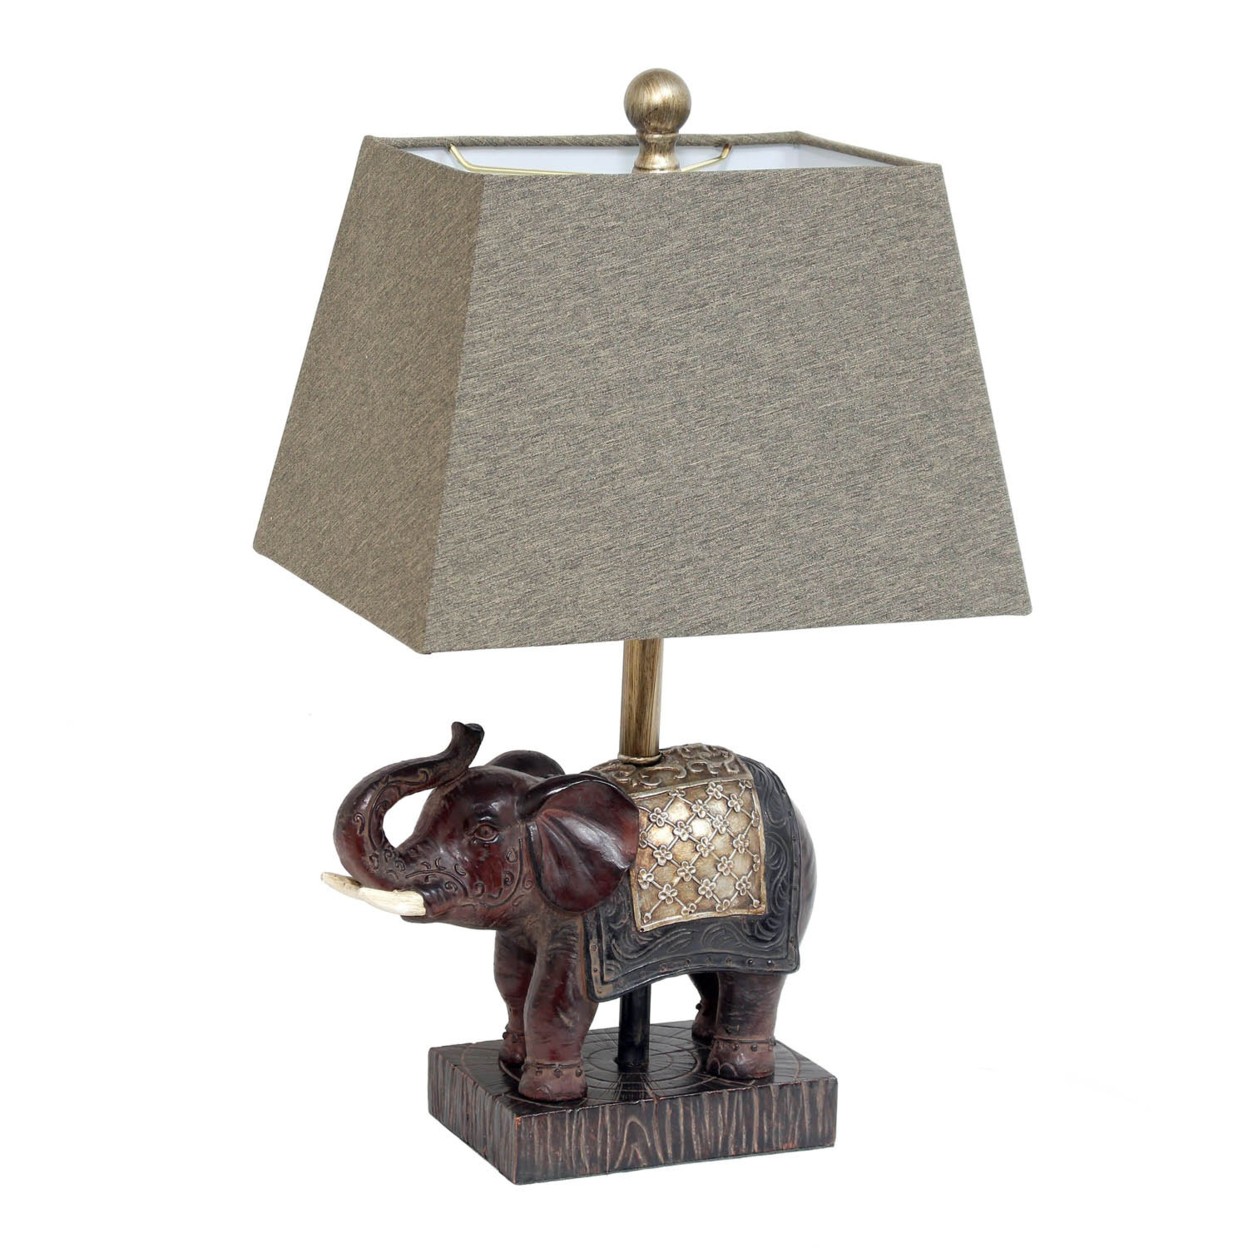 Lalia Home Elephant Table Lamp with Fabric Shade